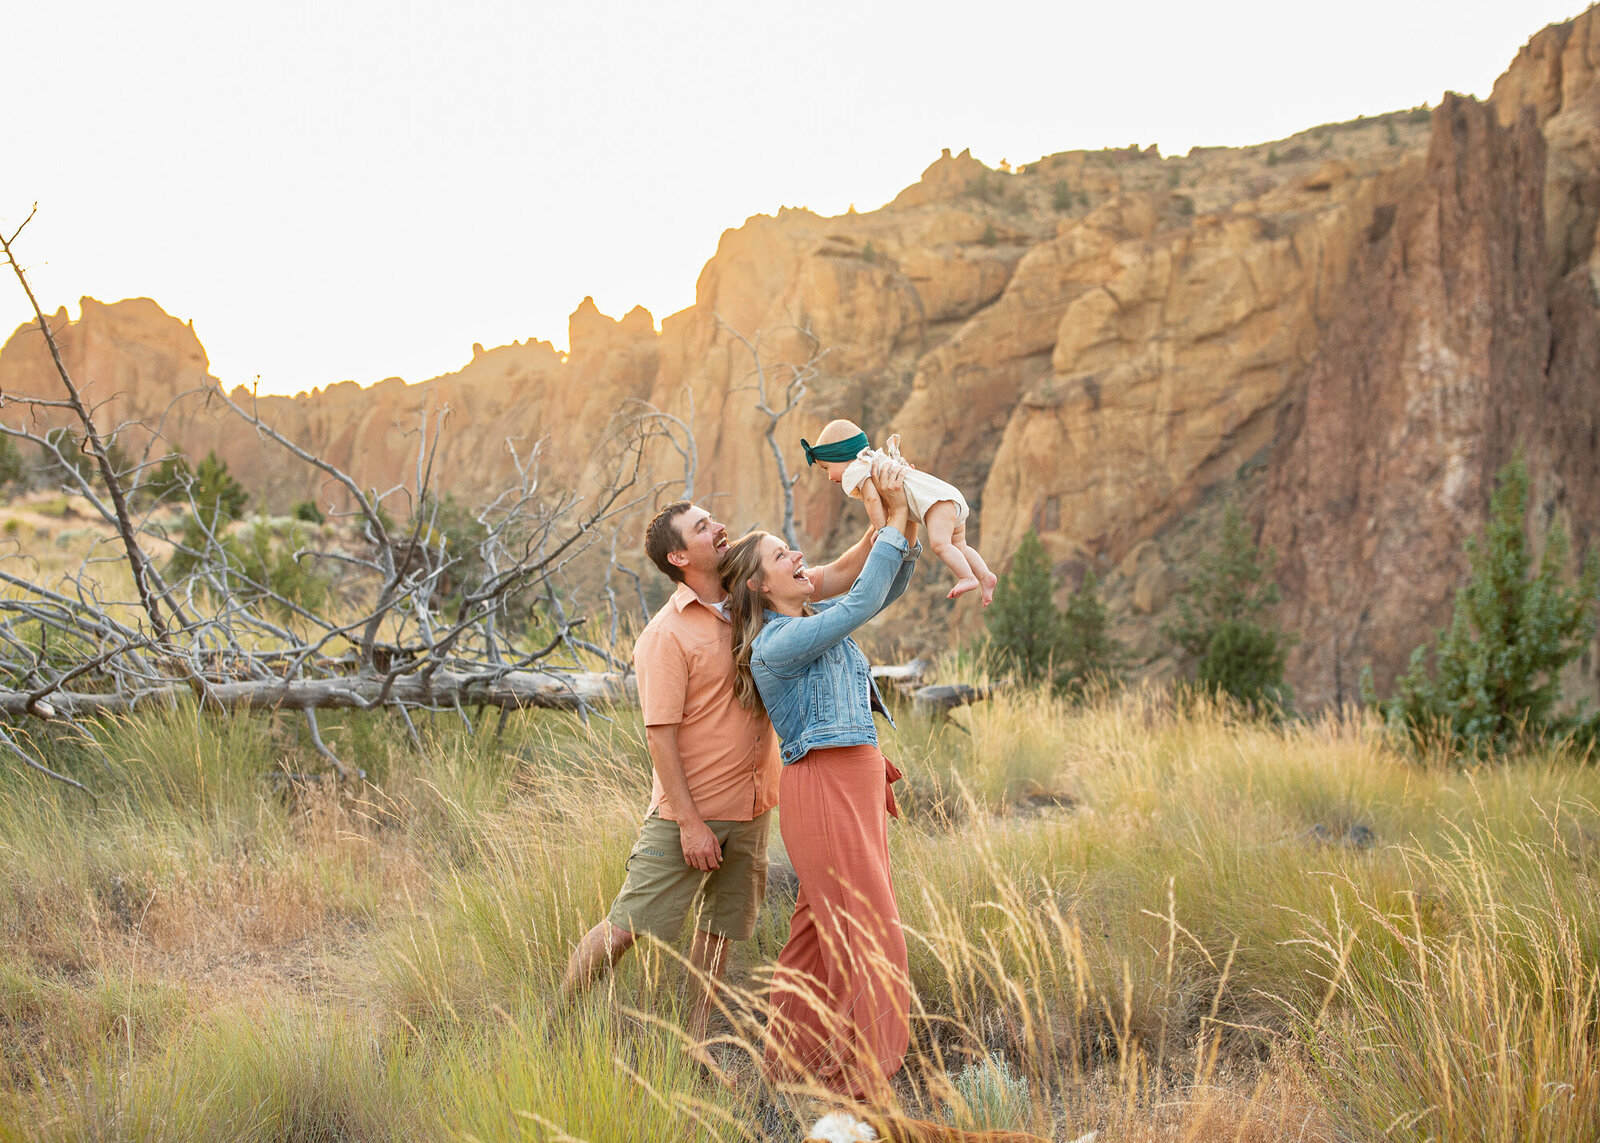 Family of three standing in field at sunset holding baby girl up in the air.